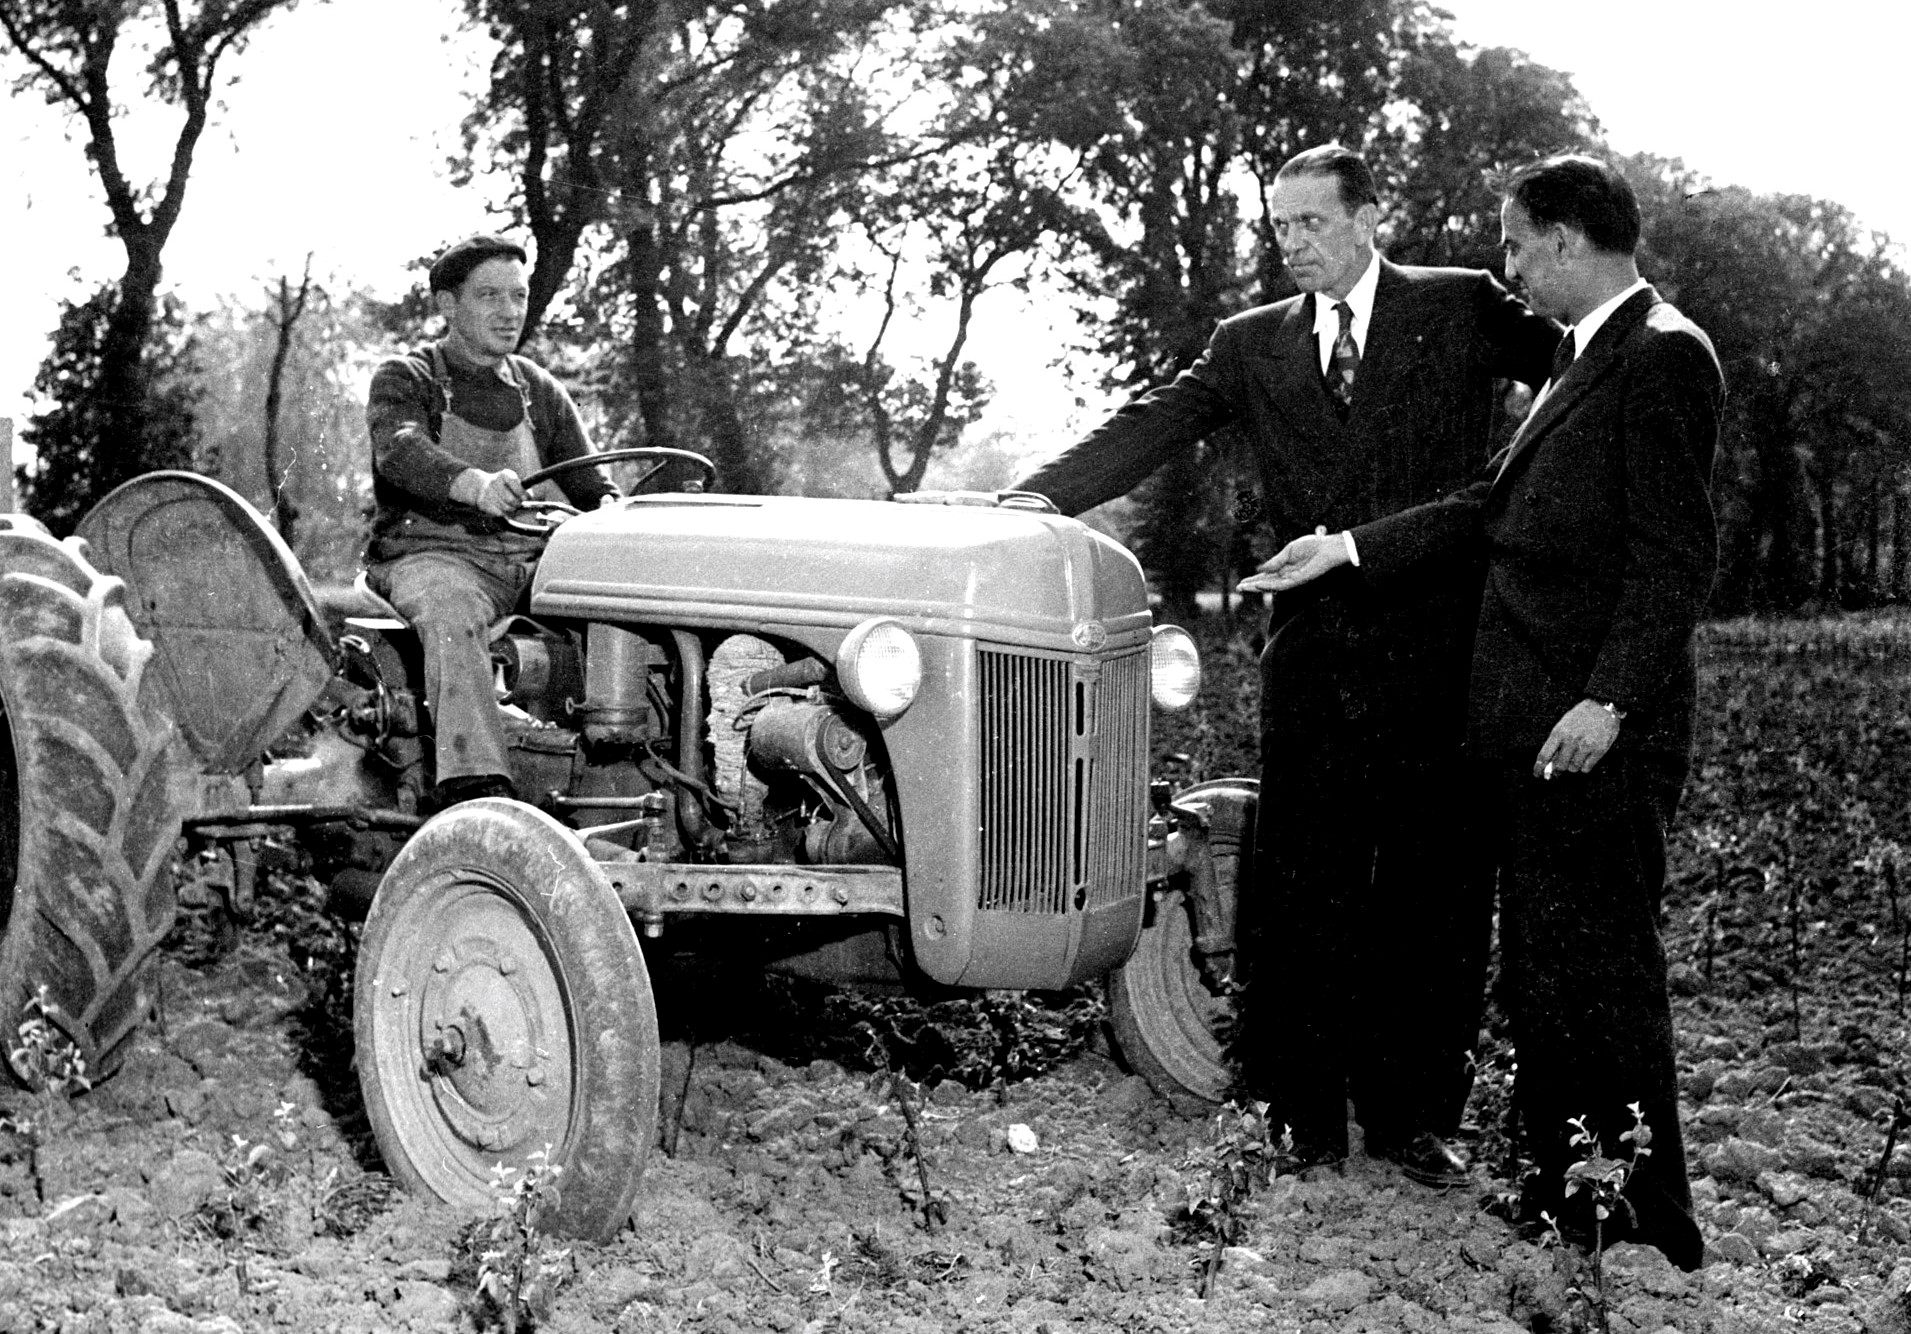 Tractors arriving in France purchased through Marshall funds, circa 1948.